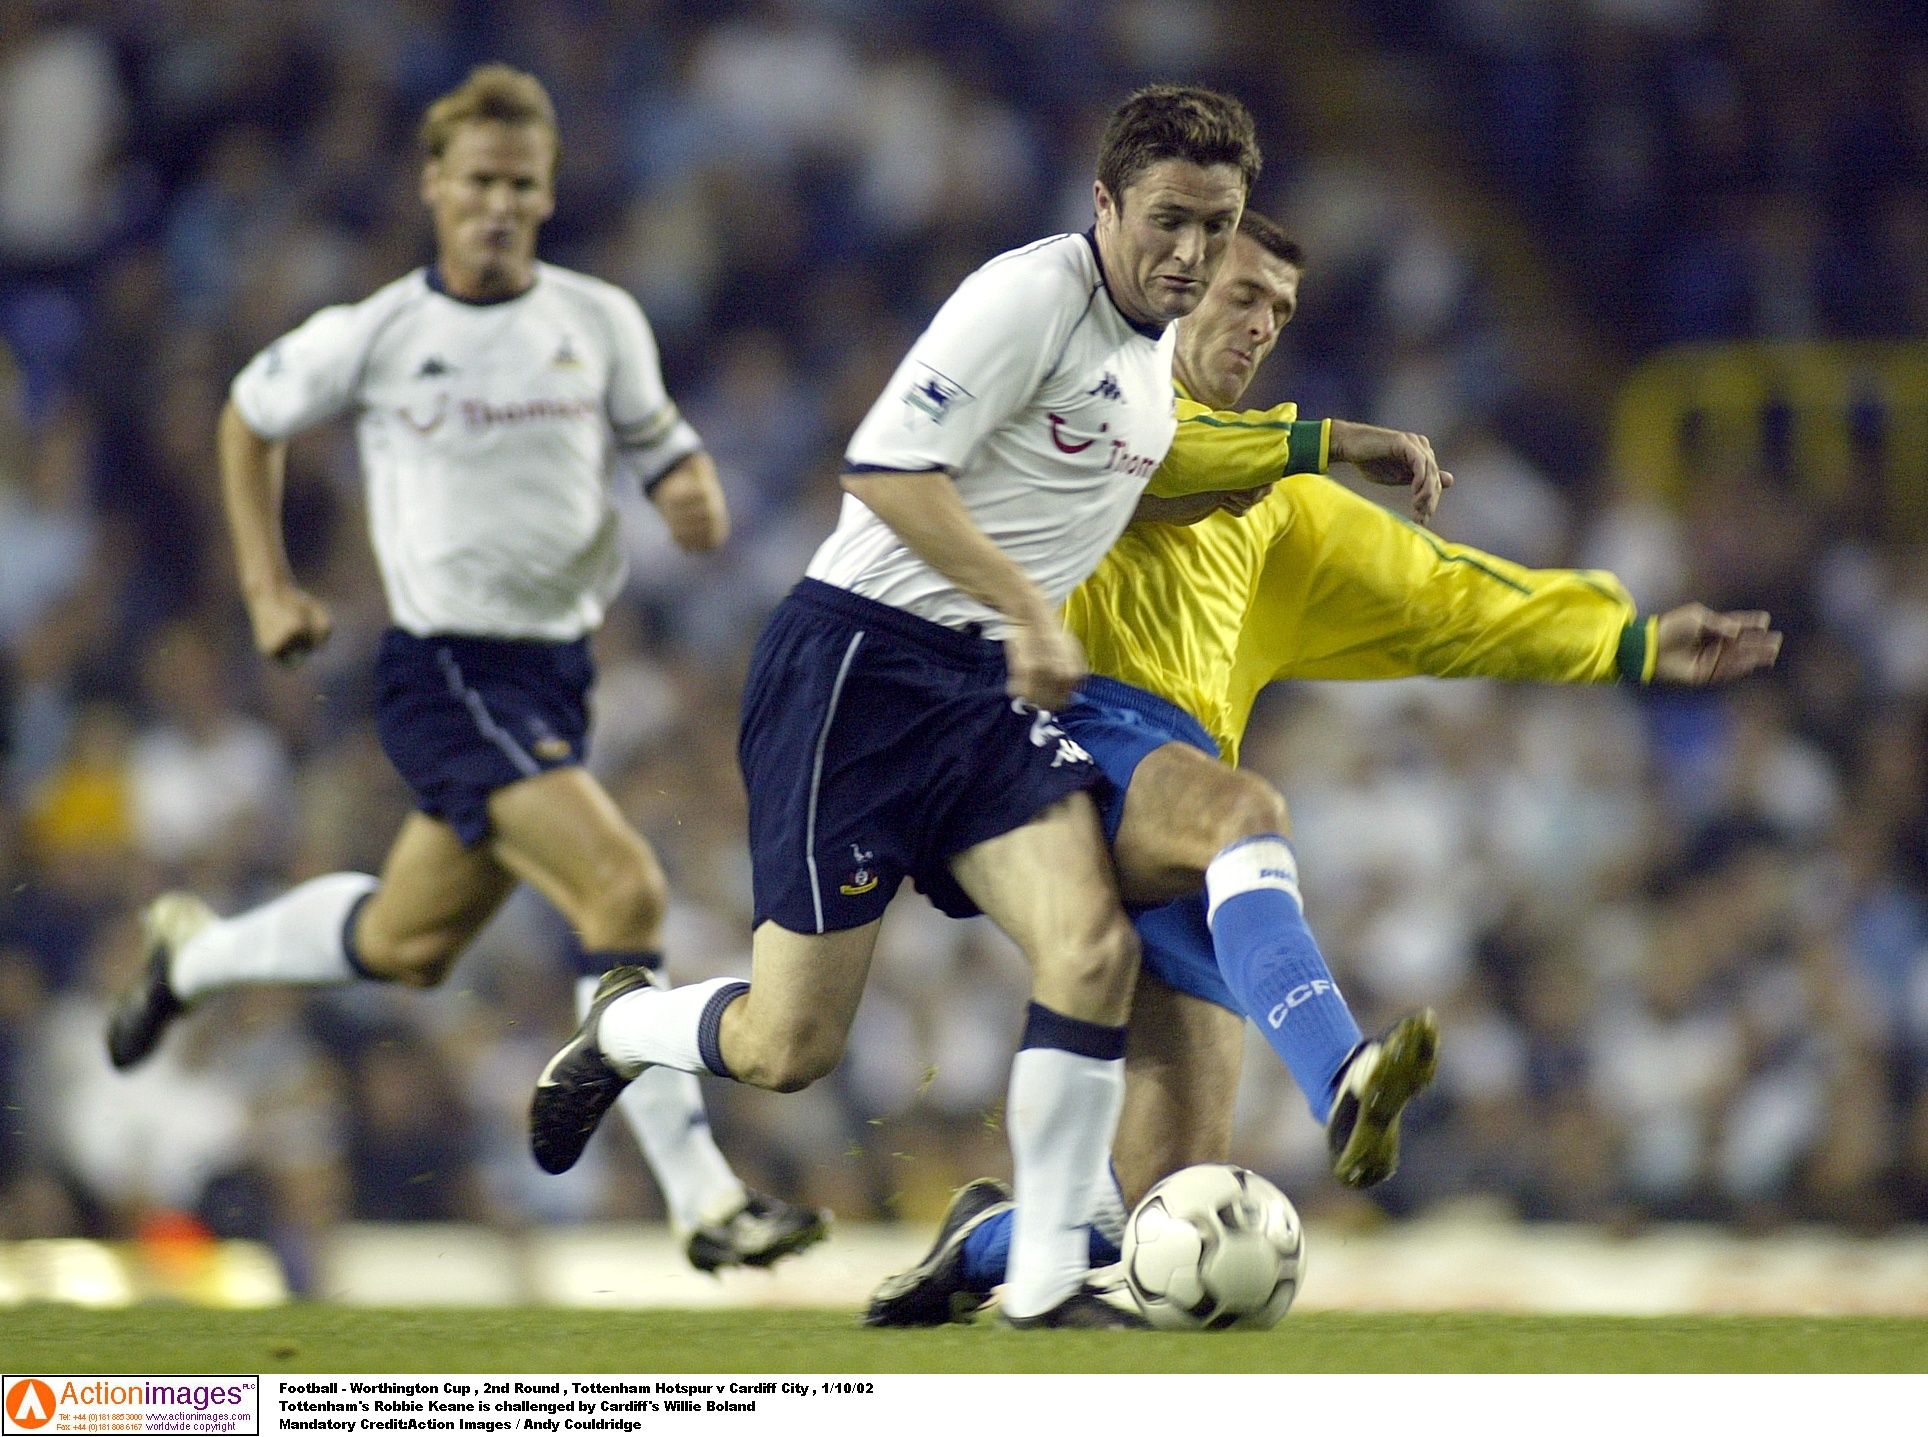 Football - Worthington Cup , 2nd Round , Tottenham Hotspur v Cardiff City , 1/10/02 
Tottenham's Robbie Keane is challenged by Cardiff's Willie Boland 
Mandatory Credit:Action Images / Andy Couldridge